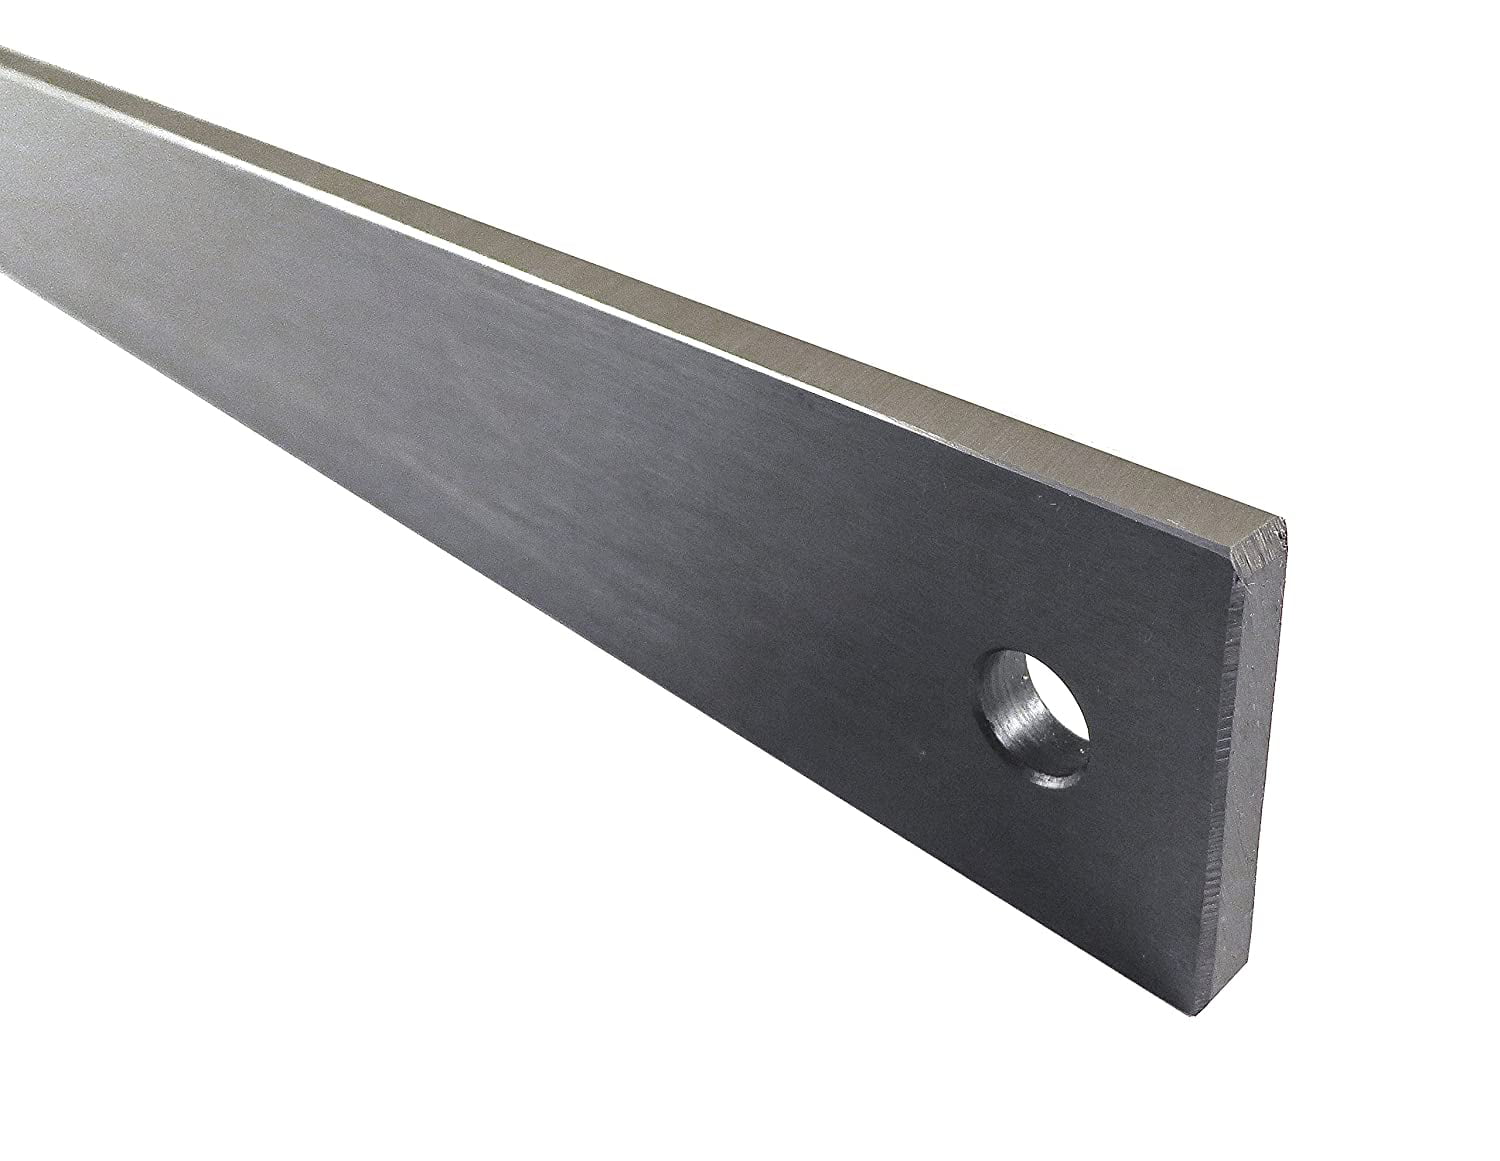 Details about   Taytools SES24 24" Steel Straight Edge Guaranteed Straight to Within .002" New!